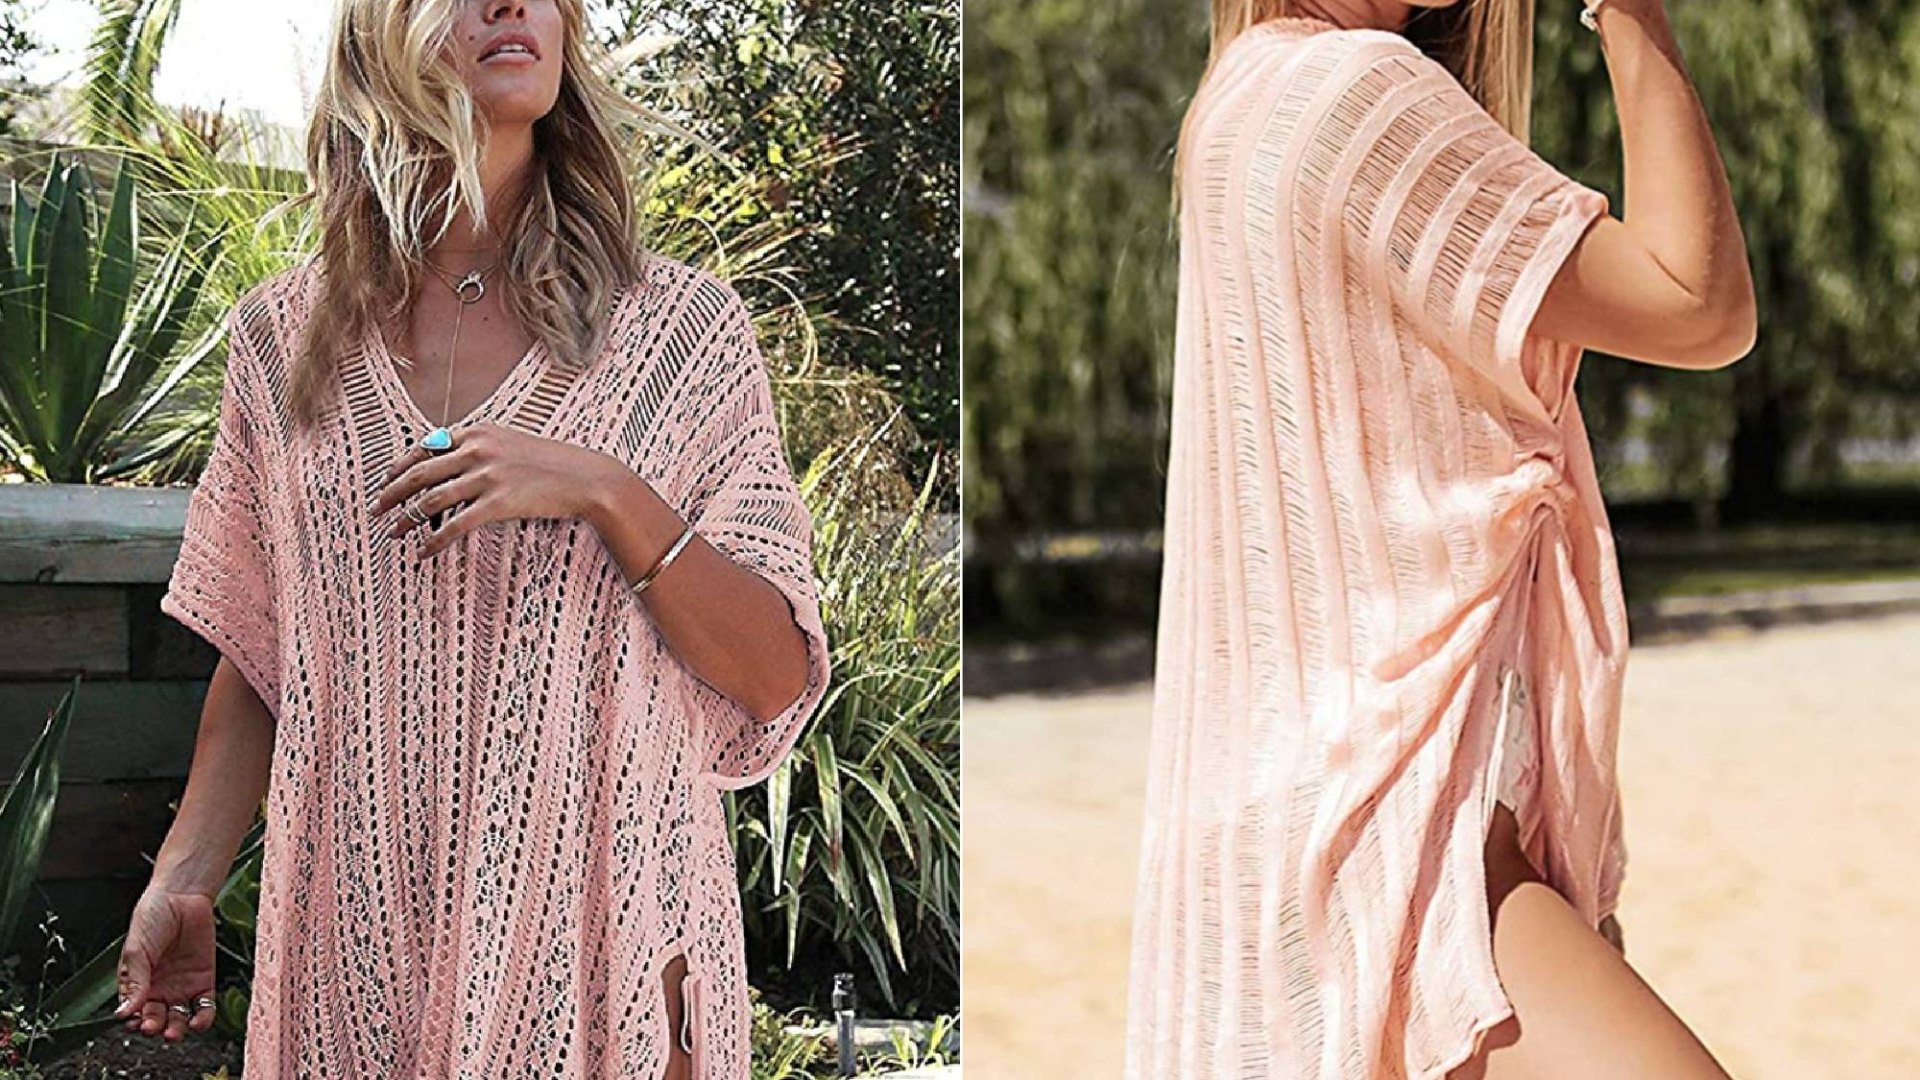 This Amazon Boho Beach Cover-Up Doubles as a Stylish Top | Us Weekly